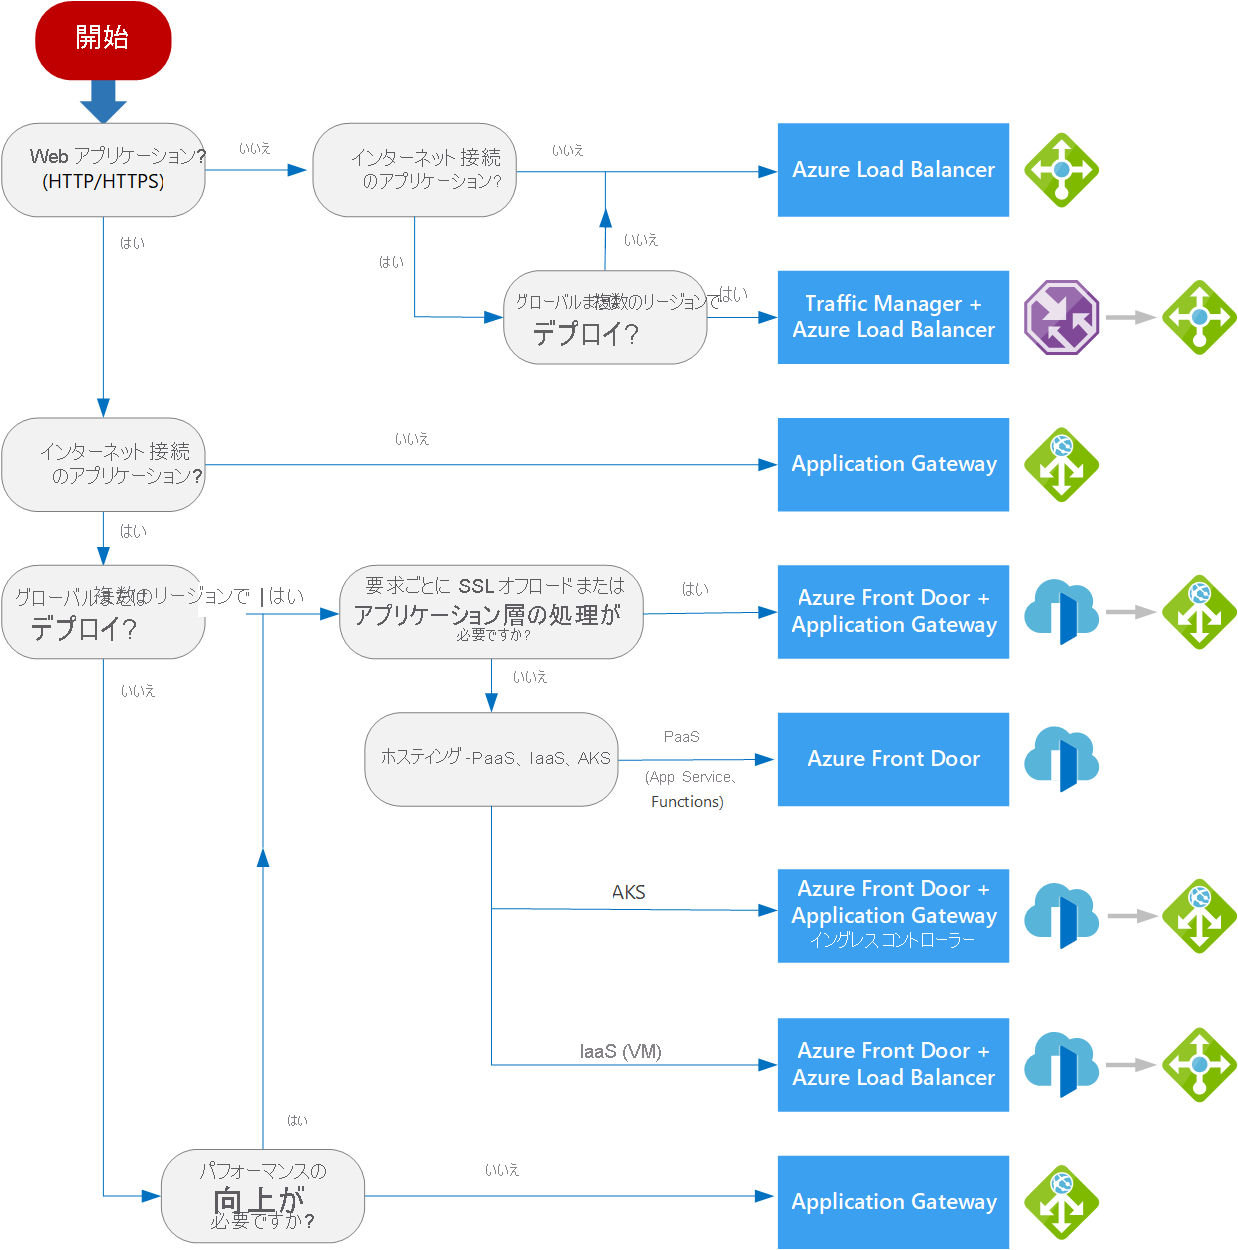 flow chart to help select a load-balancing solution for your application.